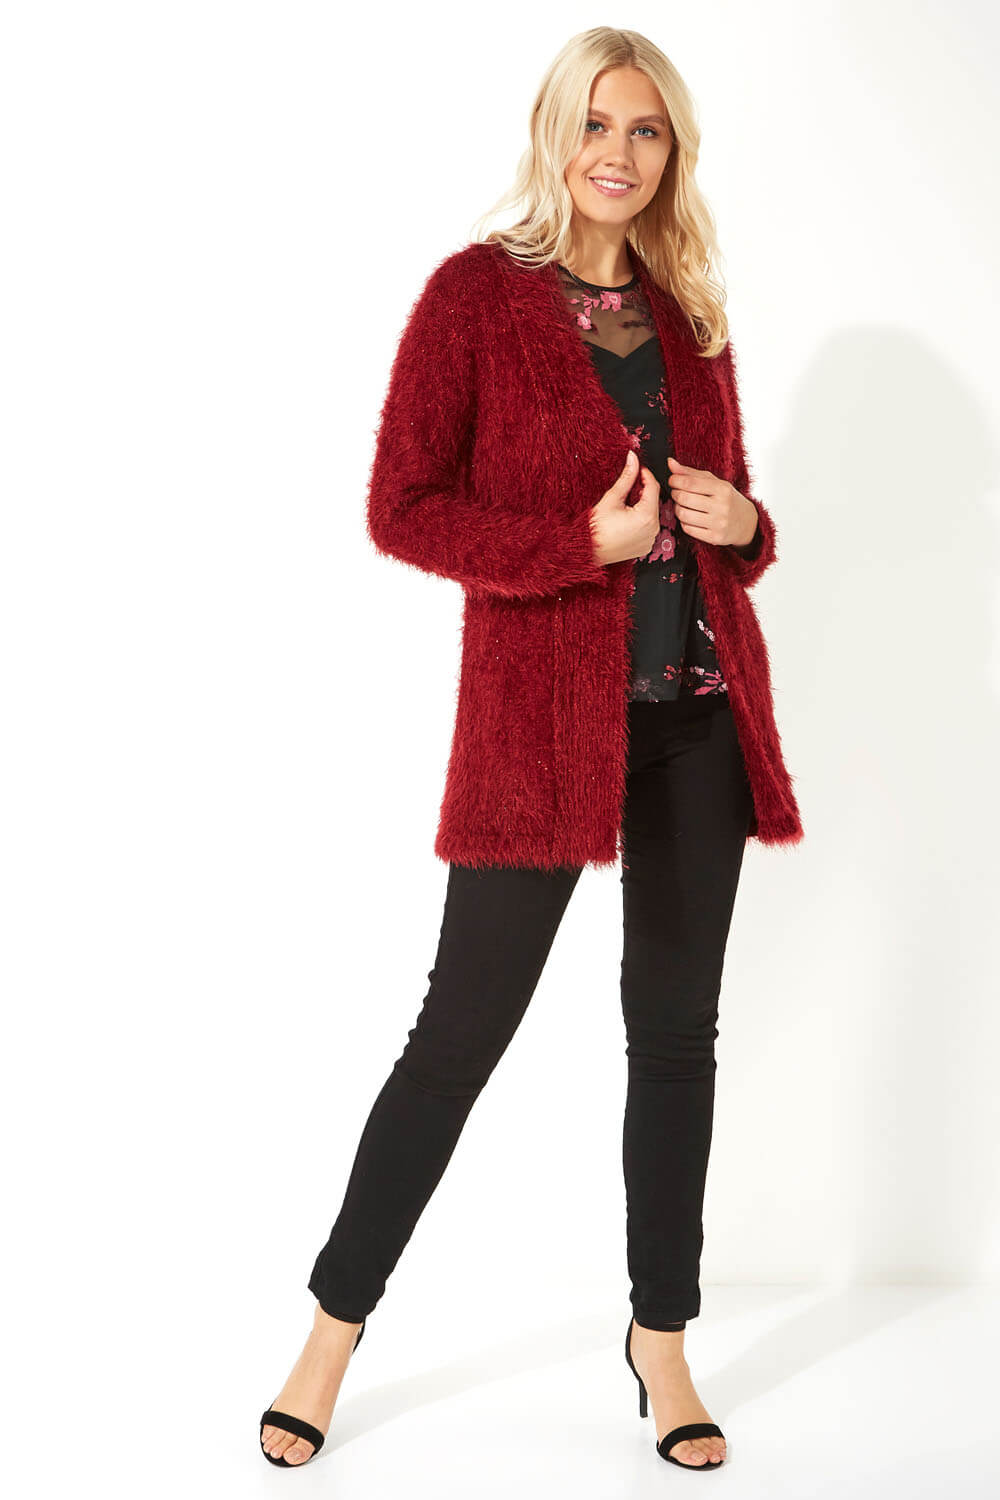 Bordeaux Fluffy Sequin Cardigan, Image 2 of 5